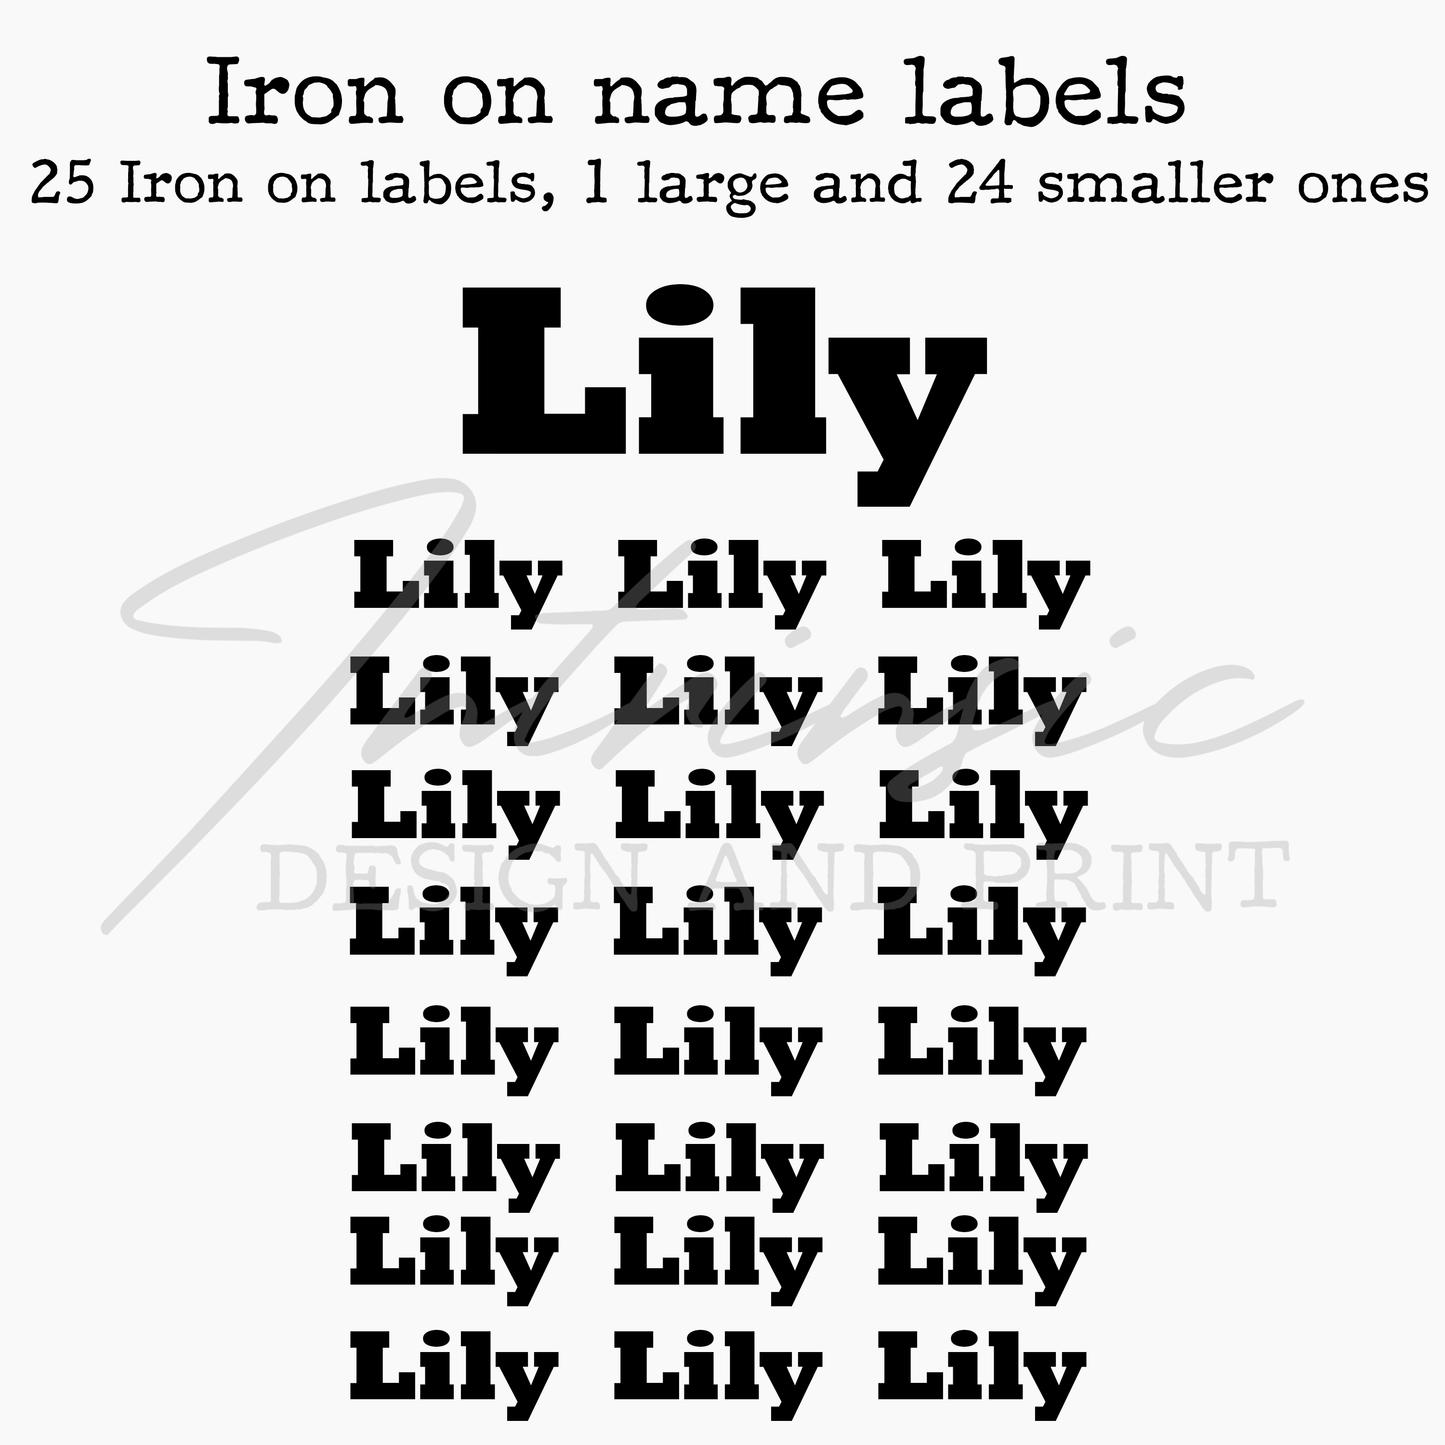 Iron on labels